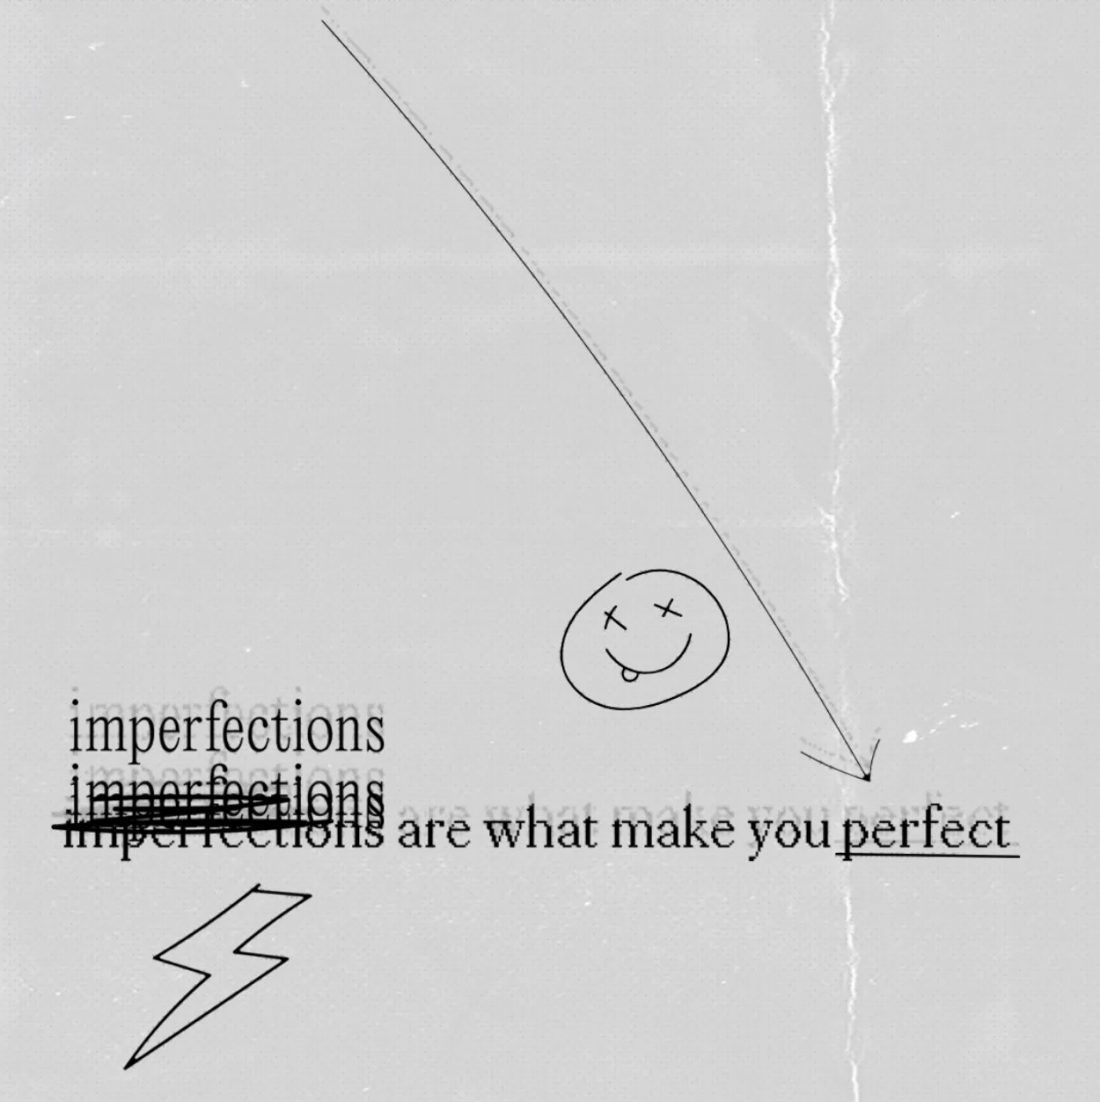 Role Model Interscope Very Good Light Cover: "Imperfections are what make you perfect."